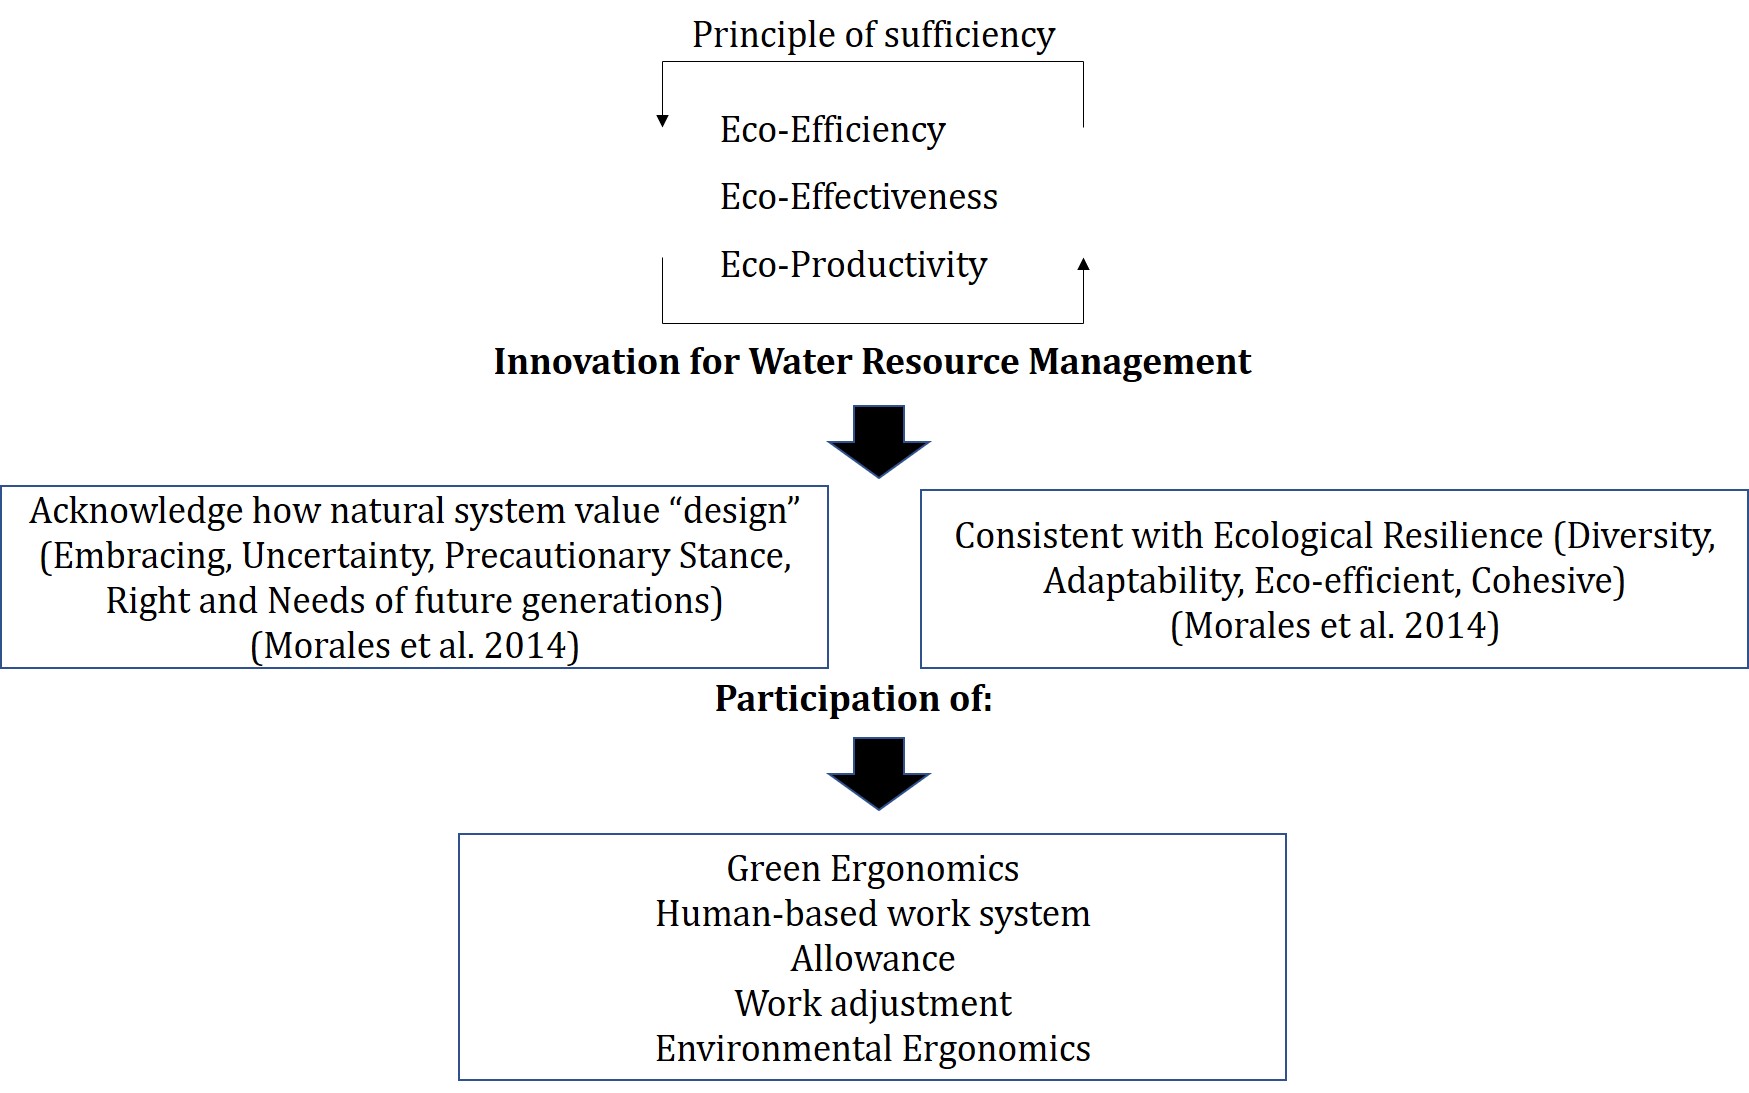 Integration of Green Ergonomics in Robust Decision Making (RDM) Approach in Water Resources Management in Makassar City